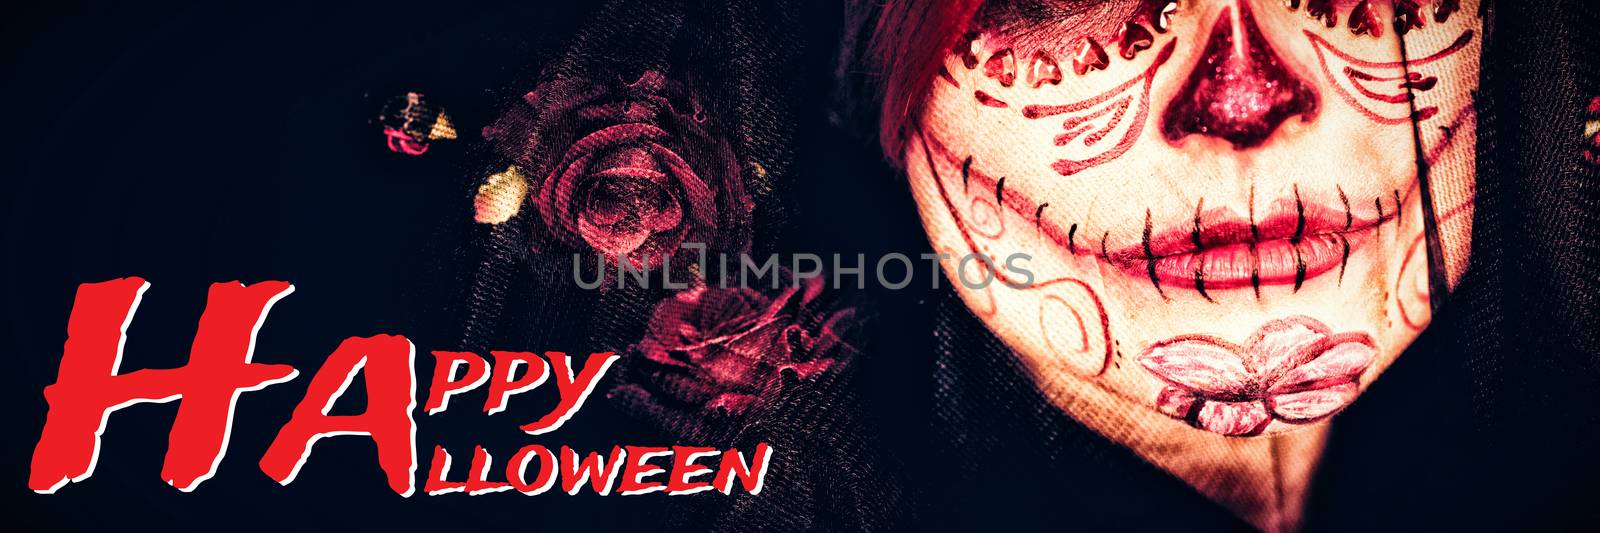 Graphic image of Happy Halloween text against attractive young woman with makeup